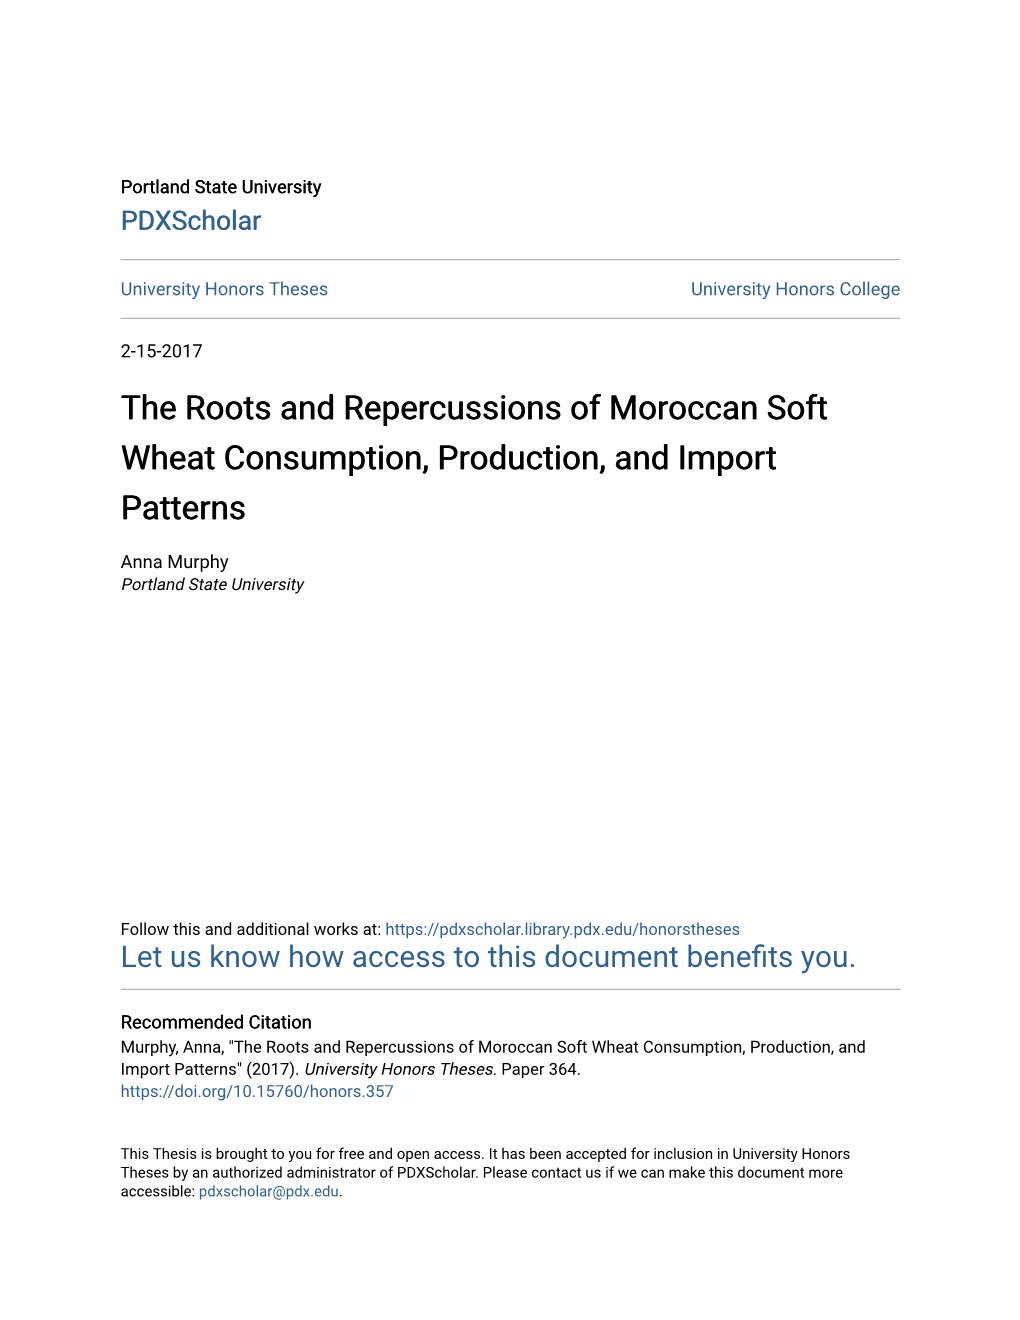 The Roots and Repercussions of Moroccan Soft Wheat Consumption, Production, and Import Patterns